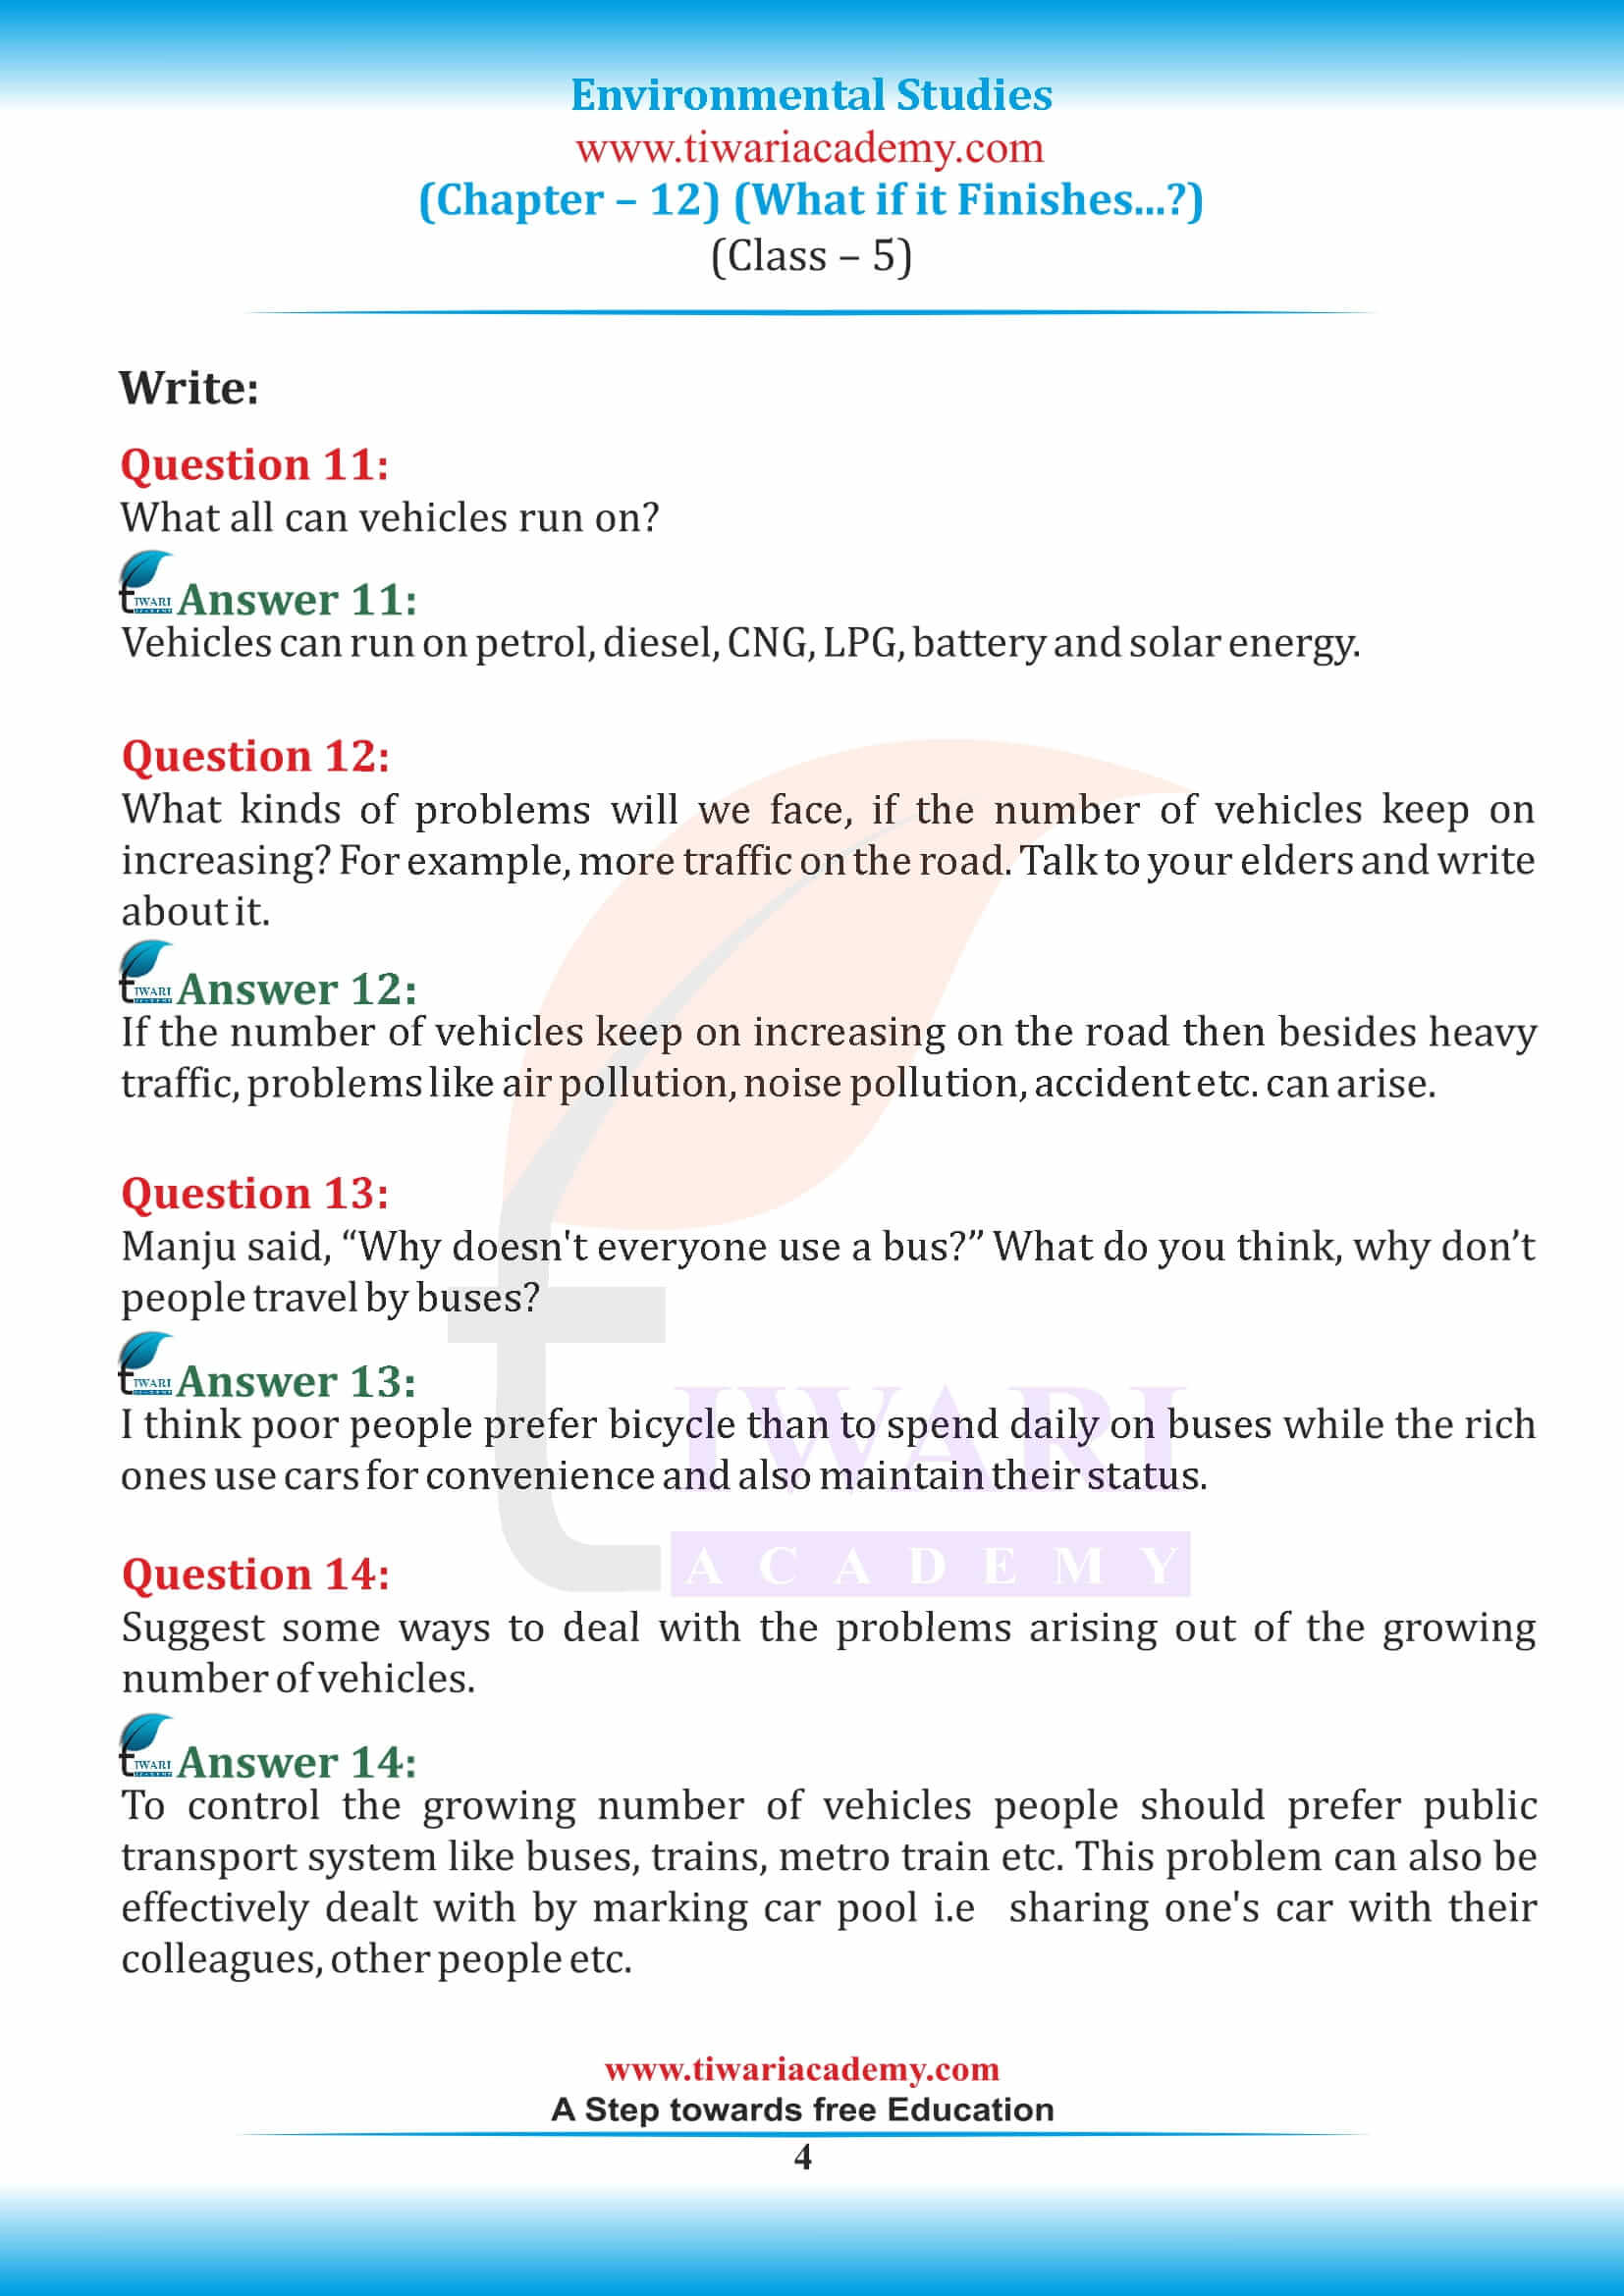 NCERT Solutions for Class 5 EVS Chapter 12 in English Medium